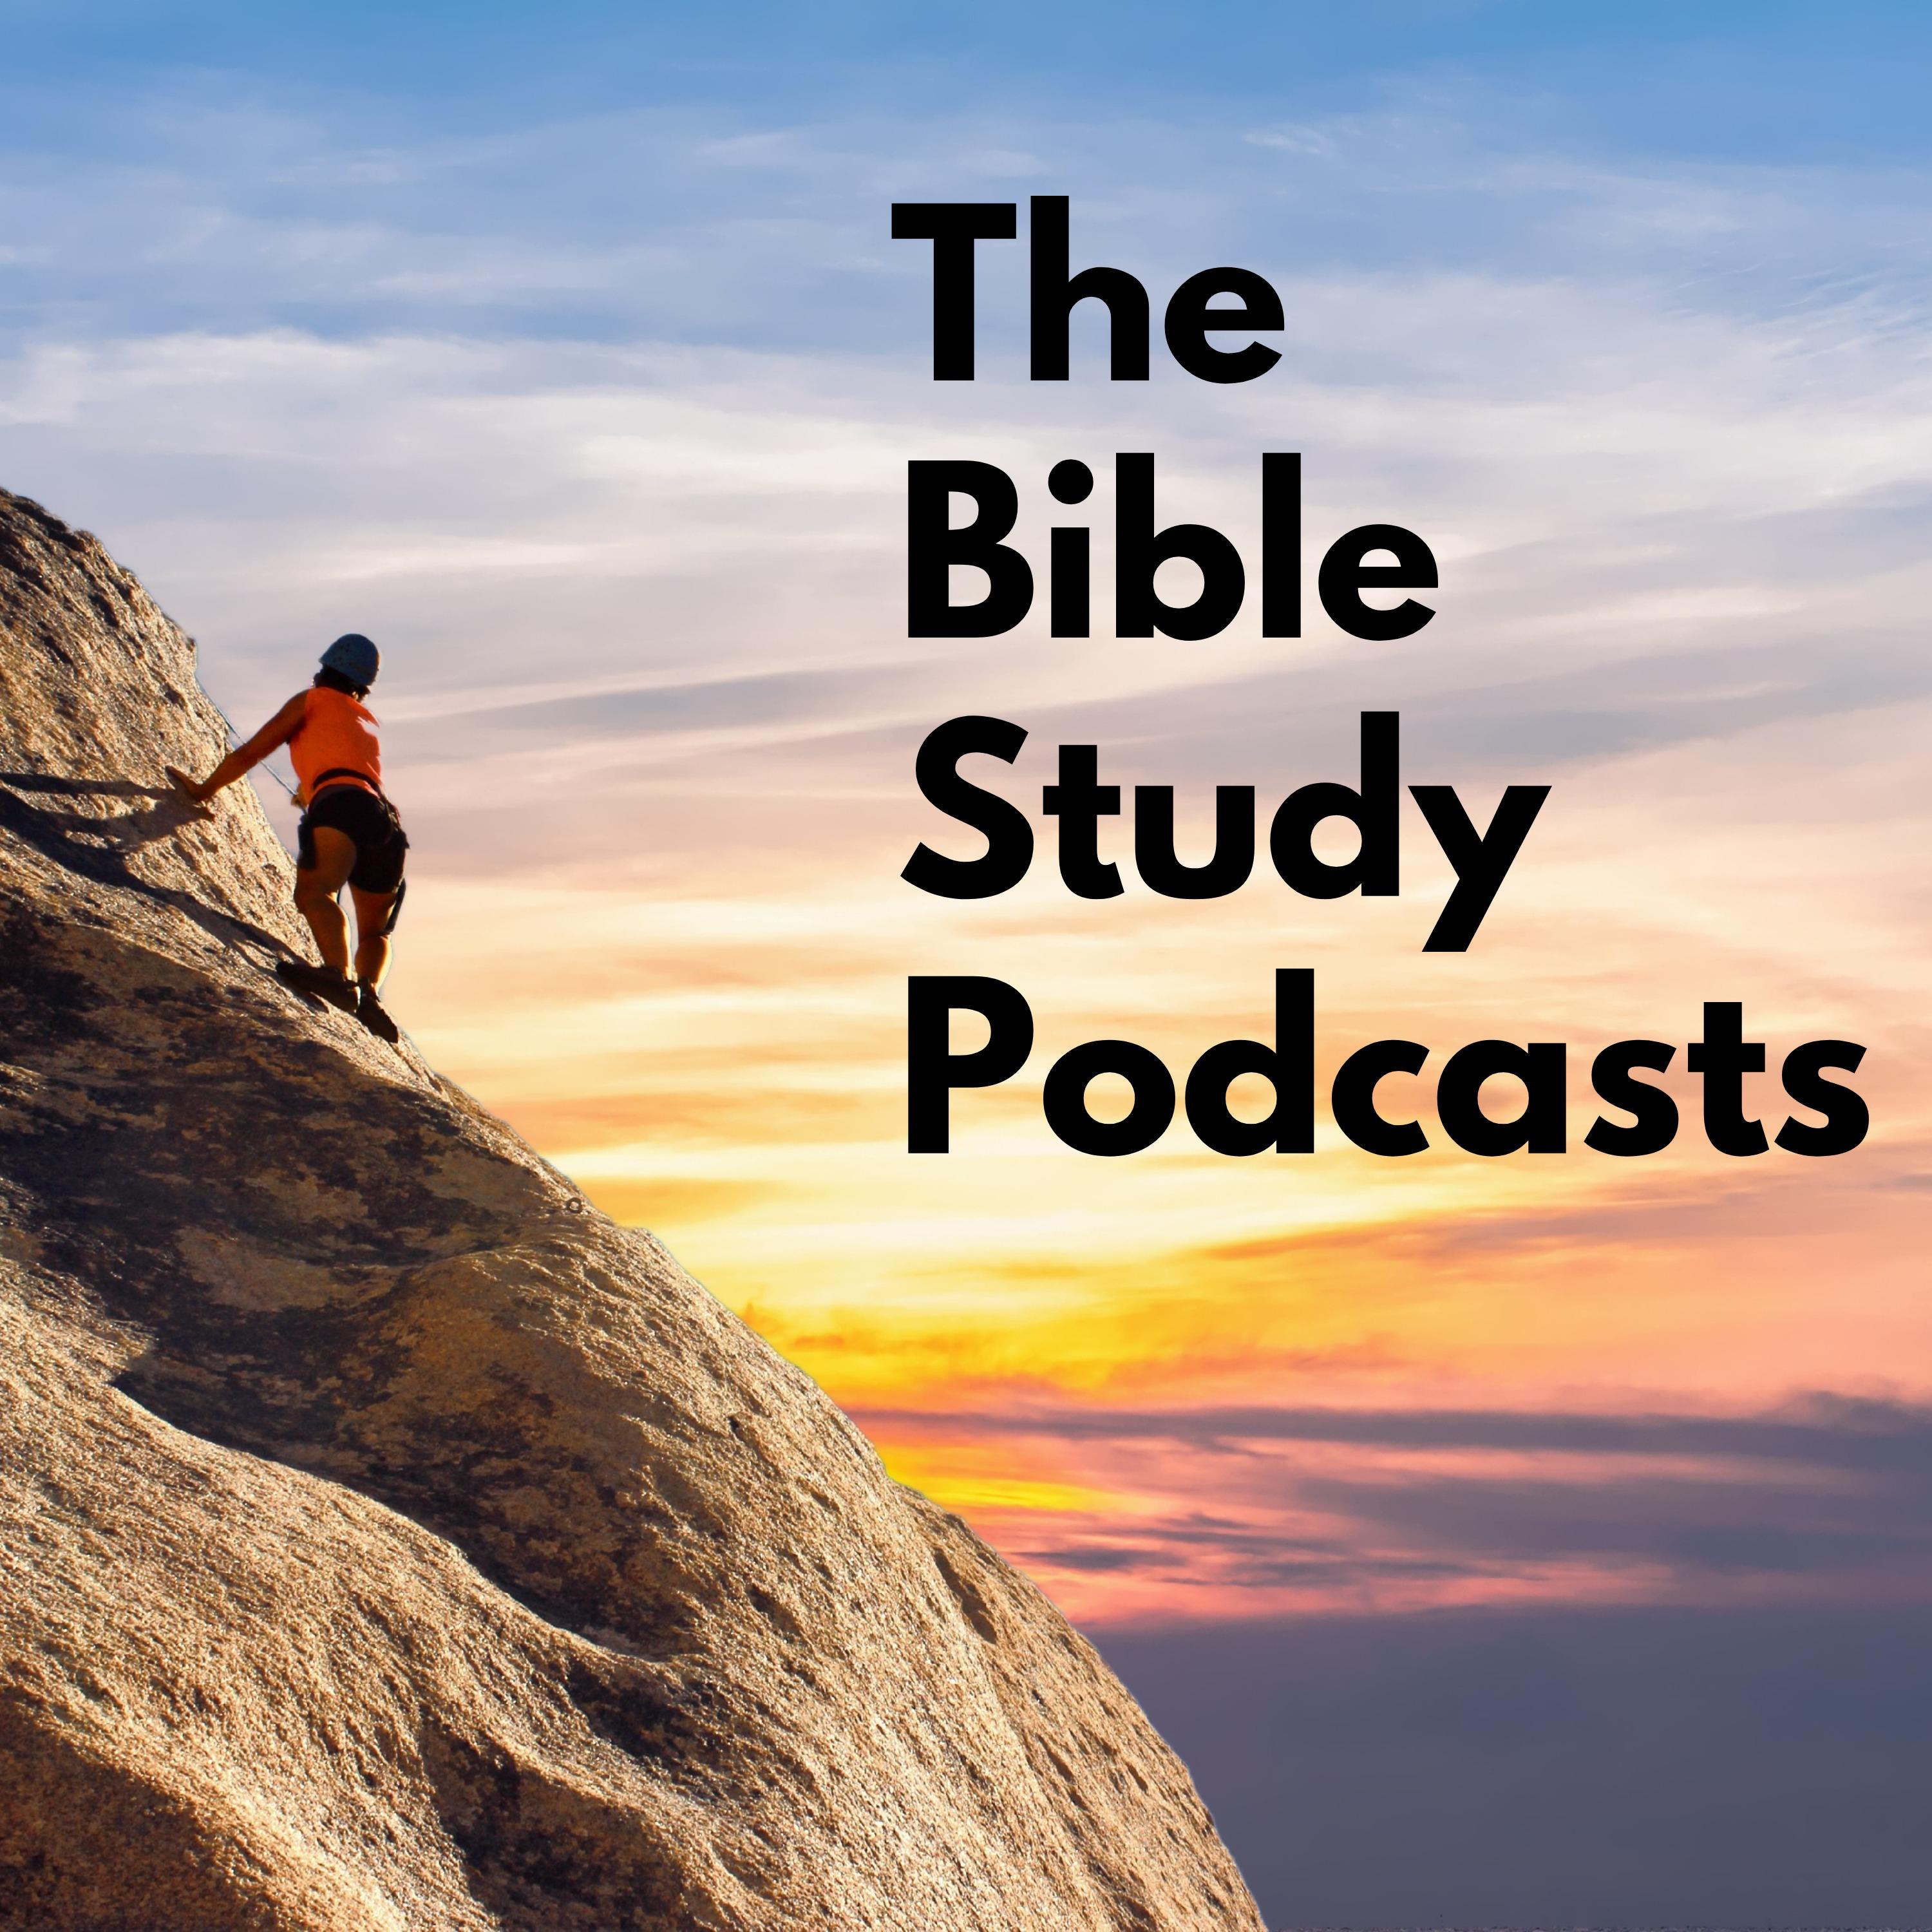 The Bible Study Podcasts